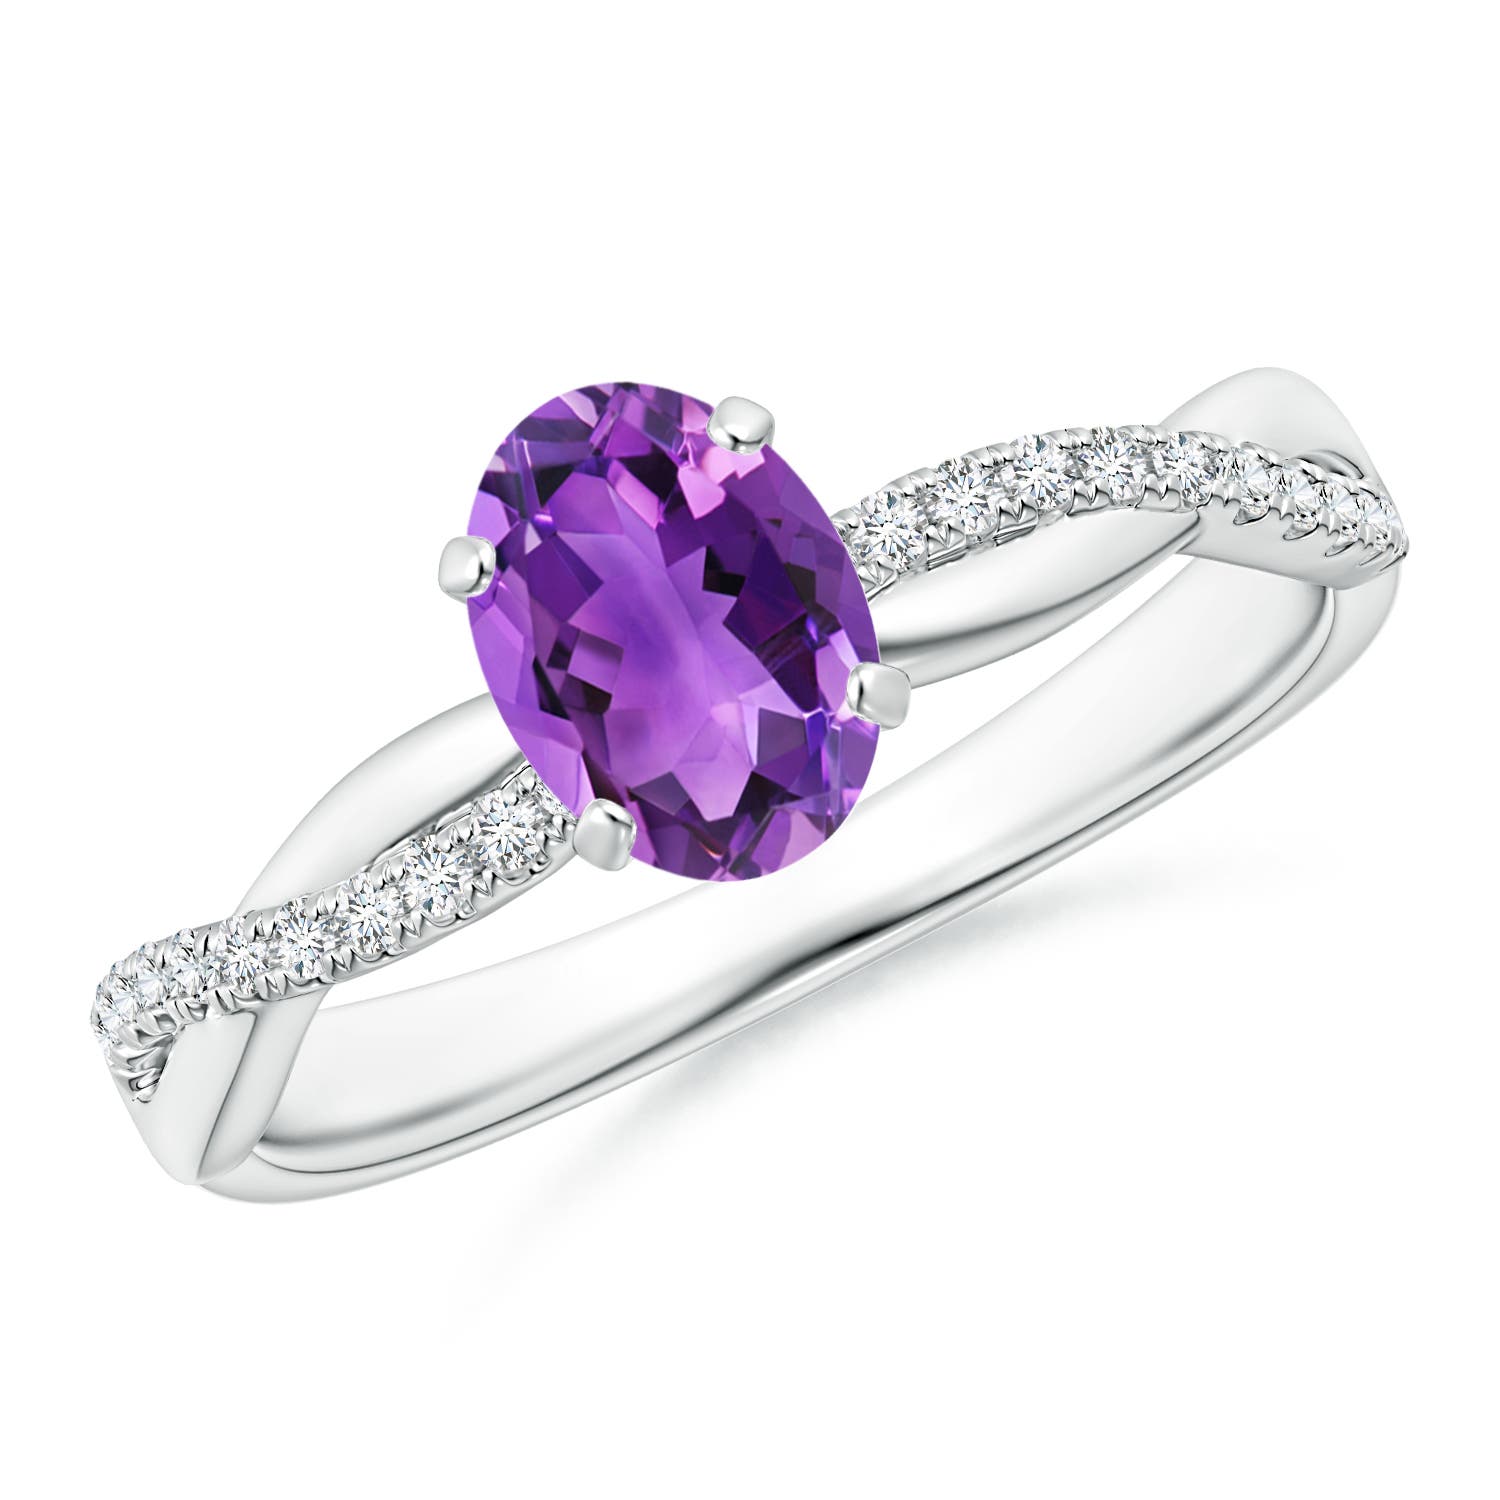 AAA - Amethyst / 0.81 CT / 14 KT White Gold